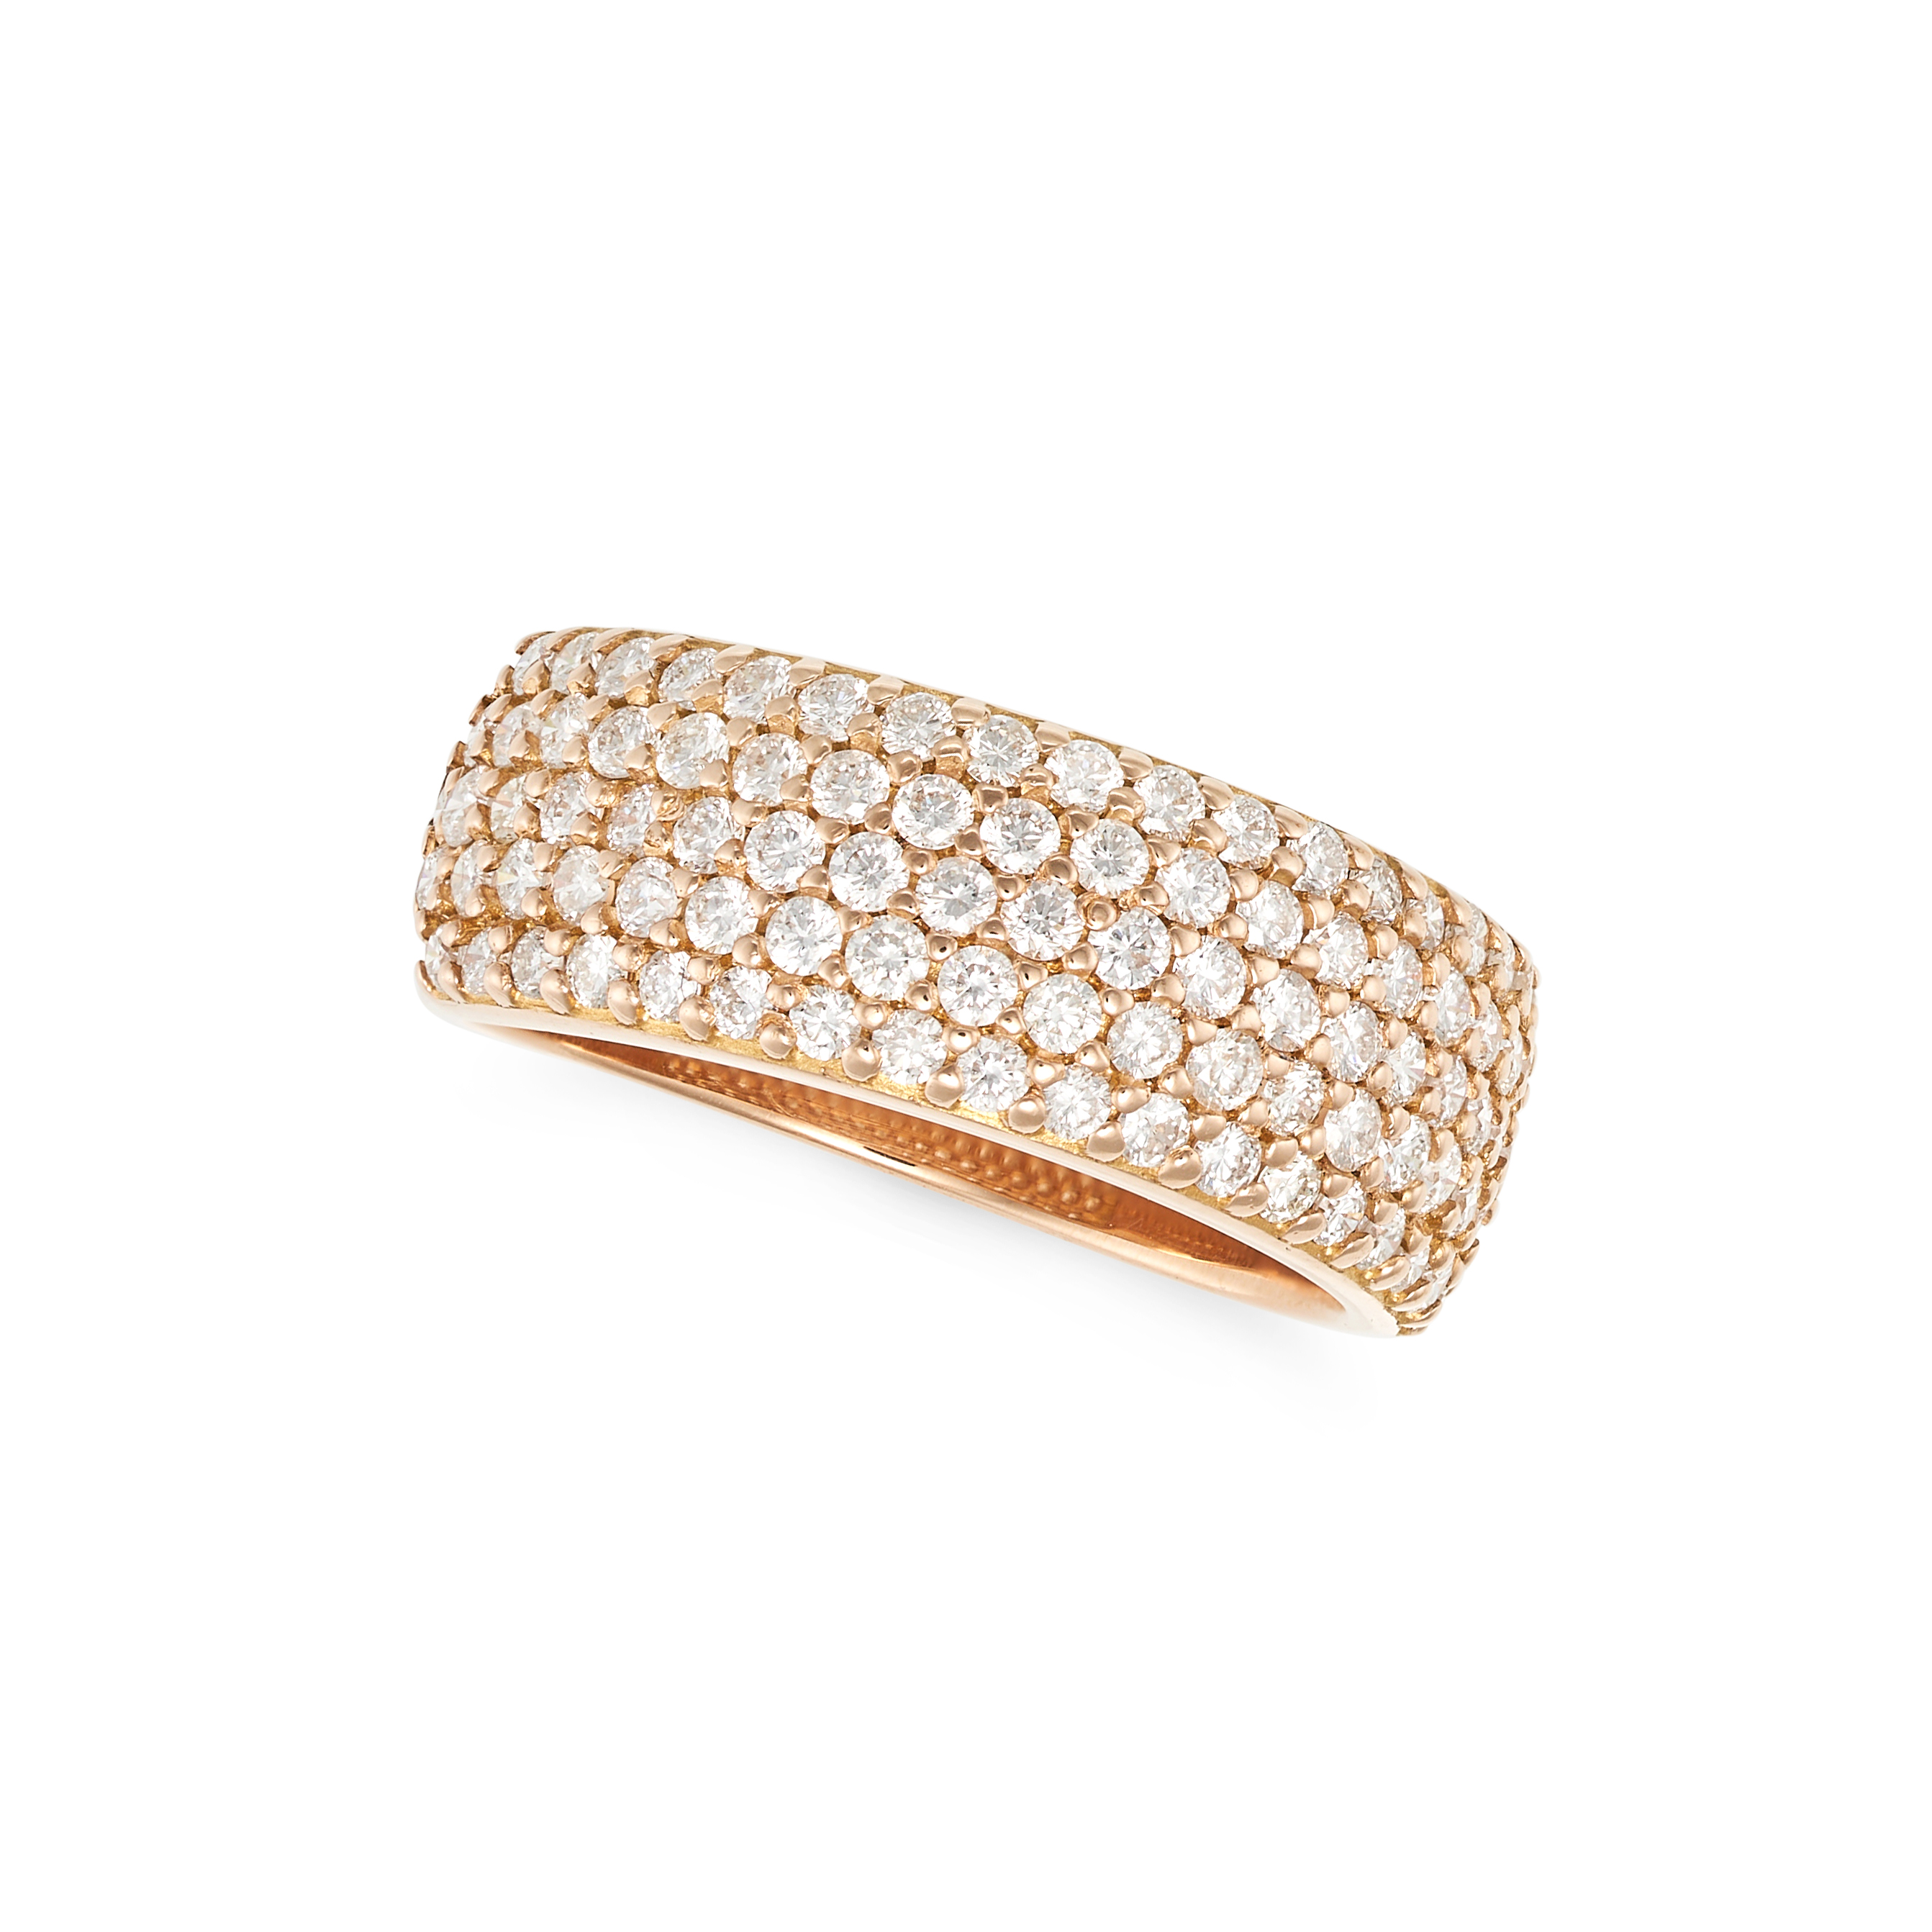 A DIAMOND DRESS RING in 18ct rose gold, the band pave set with rows of round brilliant cut diamon...